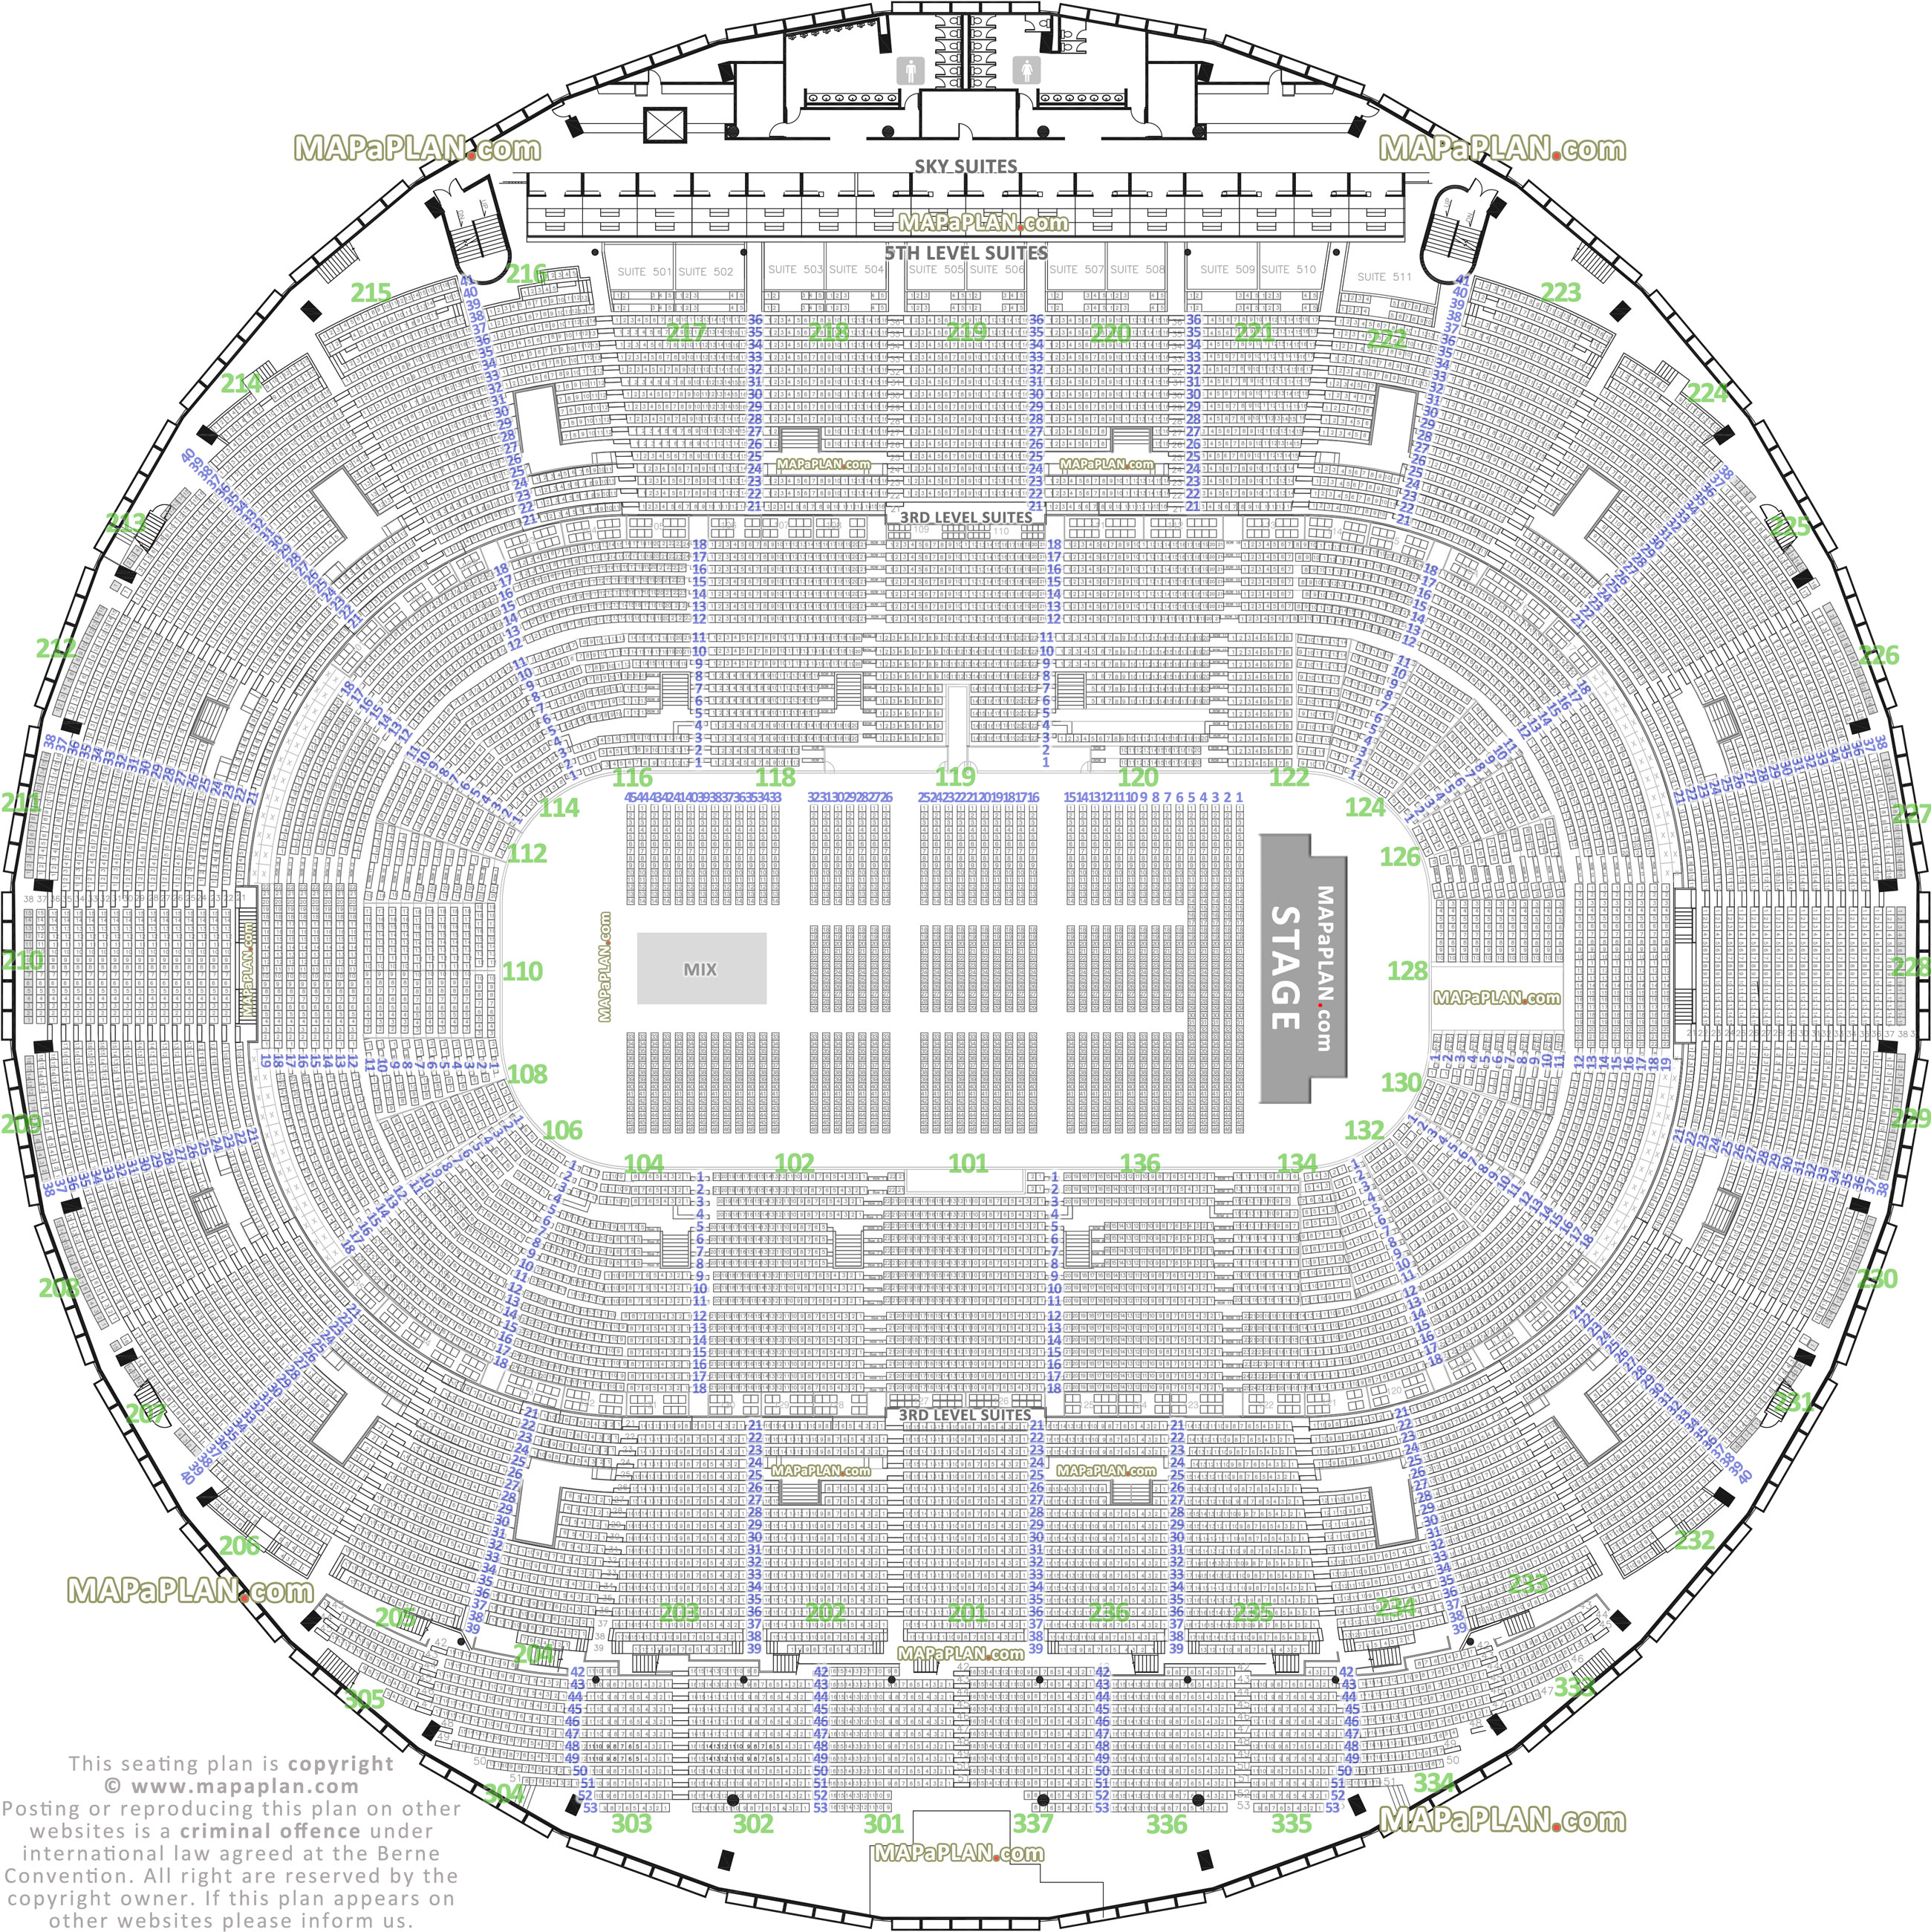 detailed seat row numbers end stage full concert sections floor plan with arena bowl layout Edmonton Rexall Place seating chart